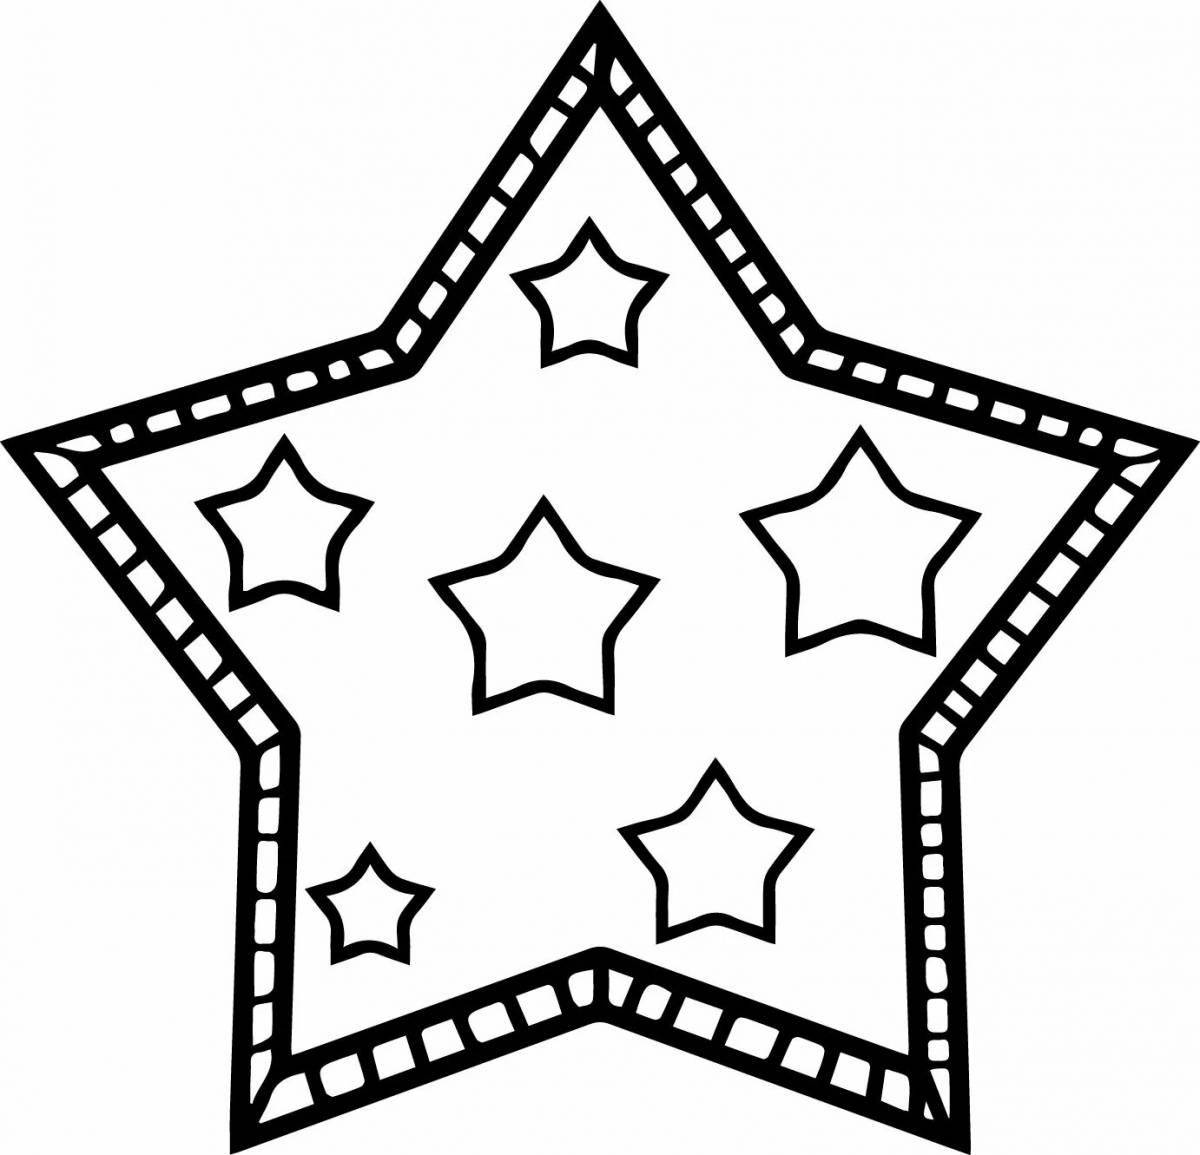 Coloring twinkling star for kids